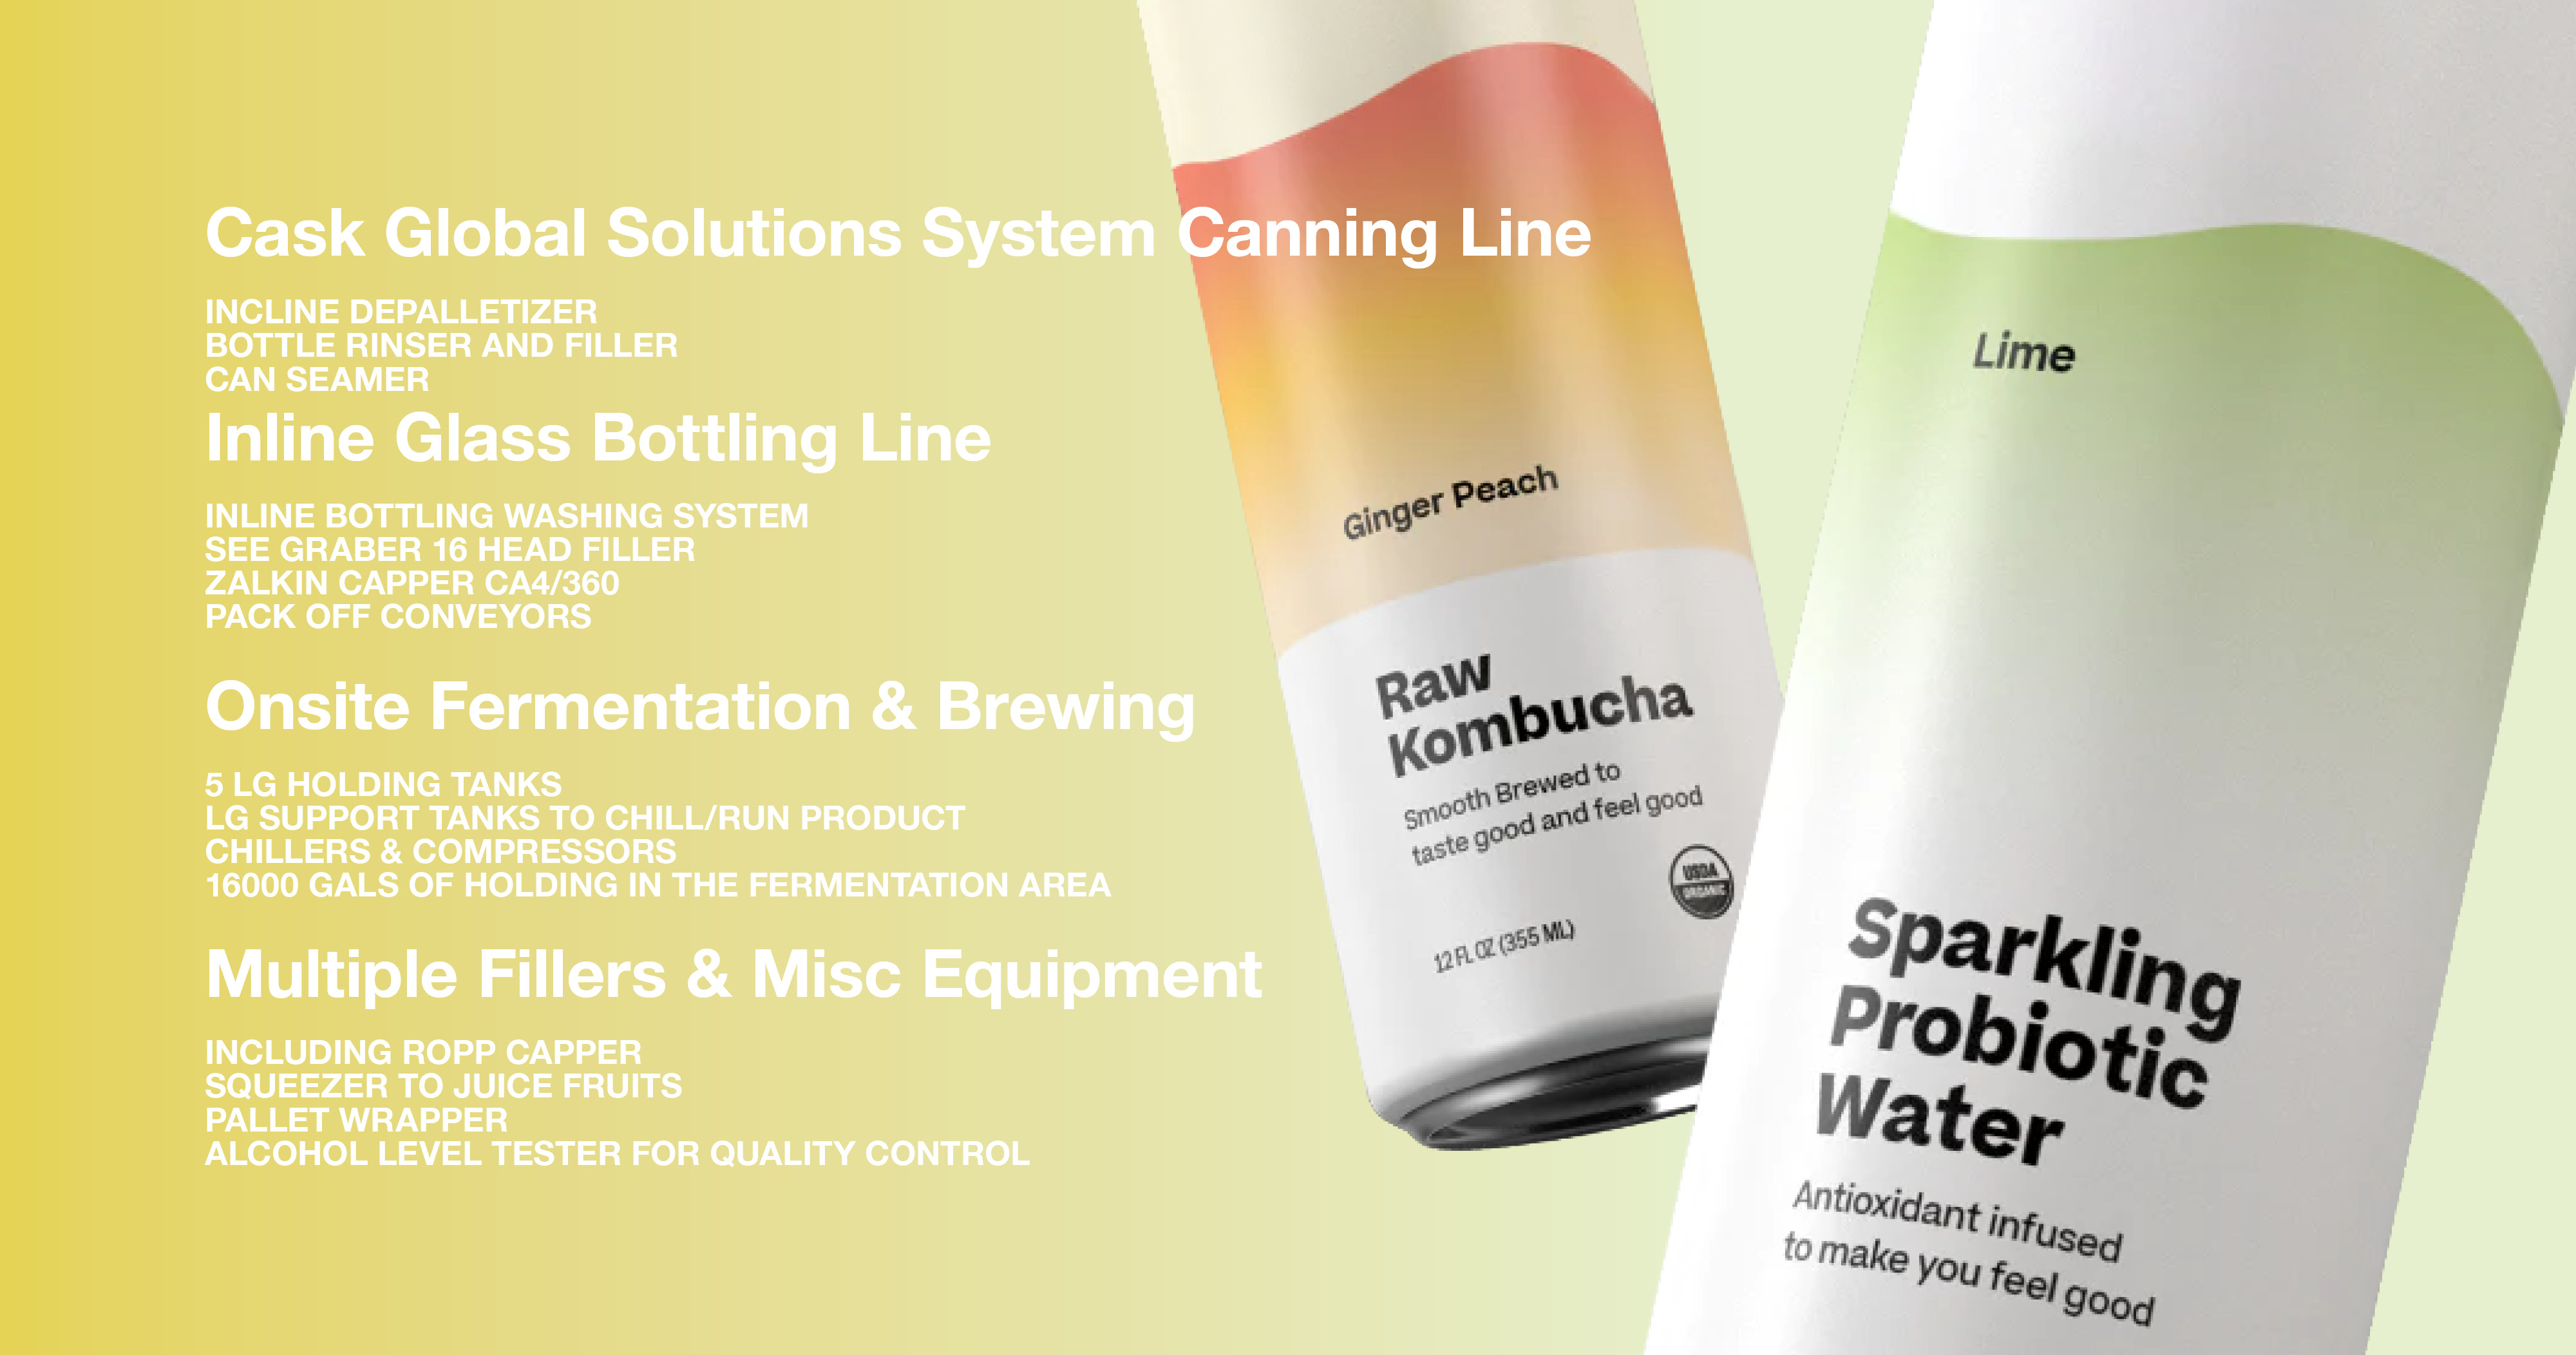 Certified Organic Kombucha & Probiotic Drink Manufacturing and Packaging Facility 